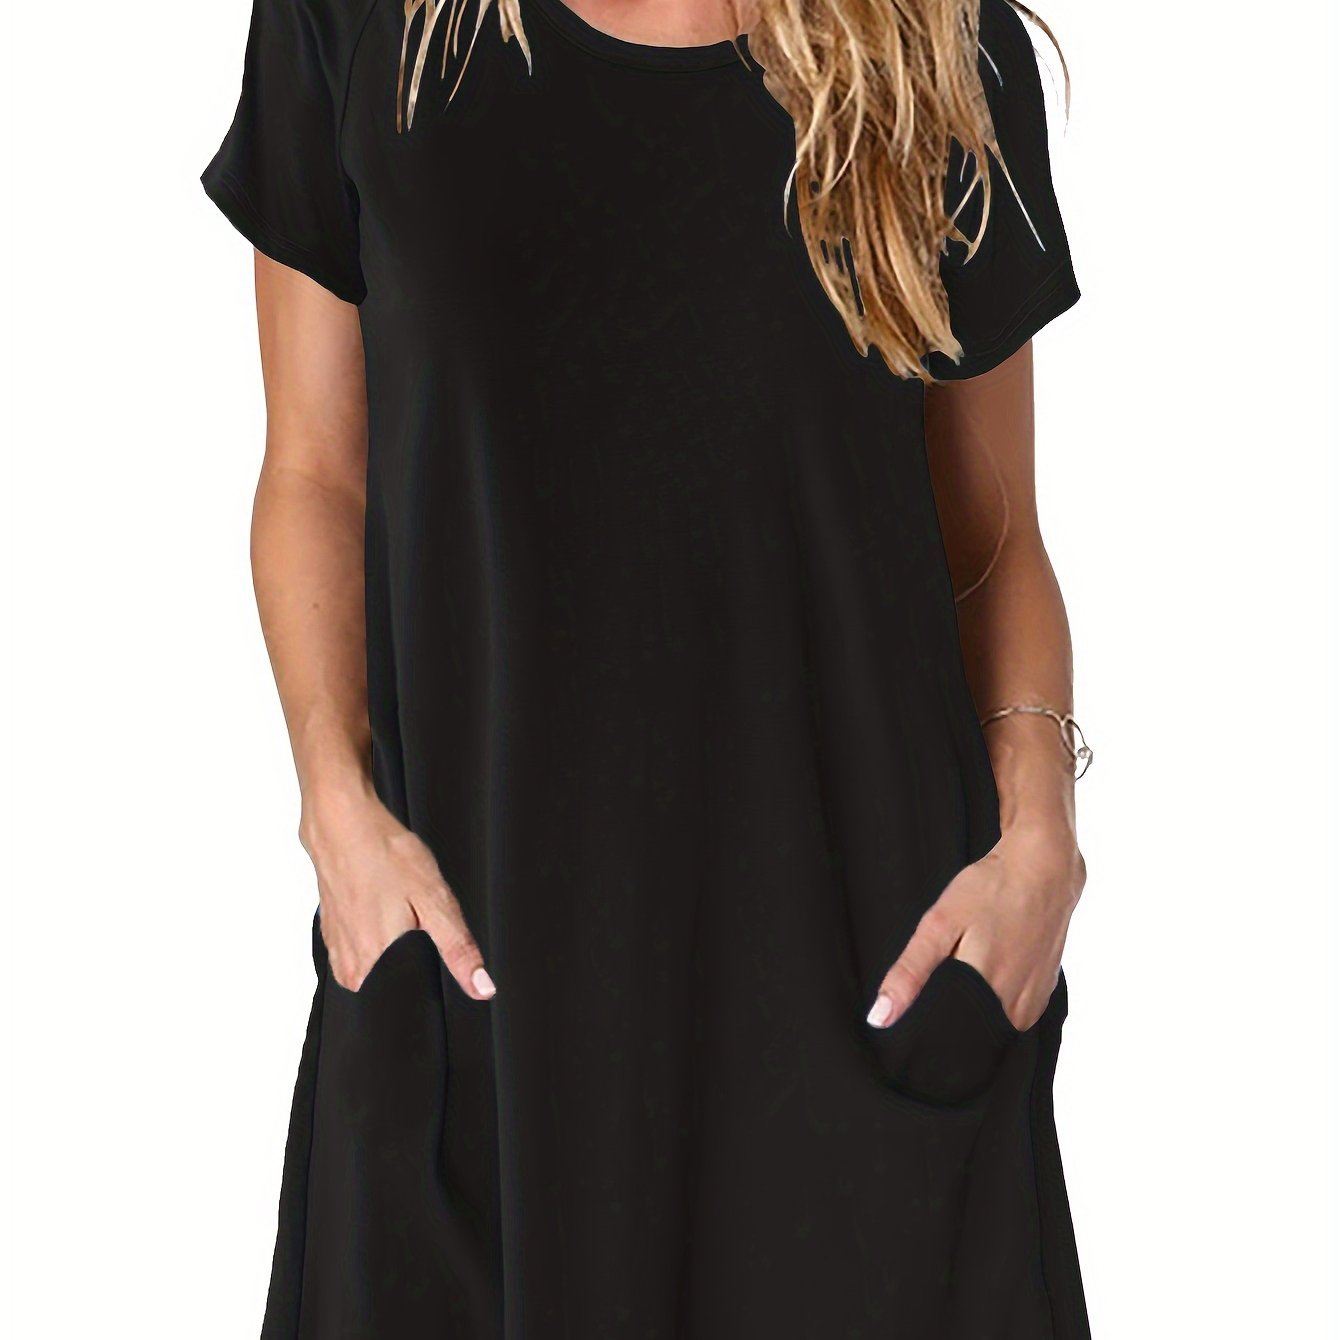 solid crew neck dual pocket dress casual short sleeve dress for spring summer womens clothing